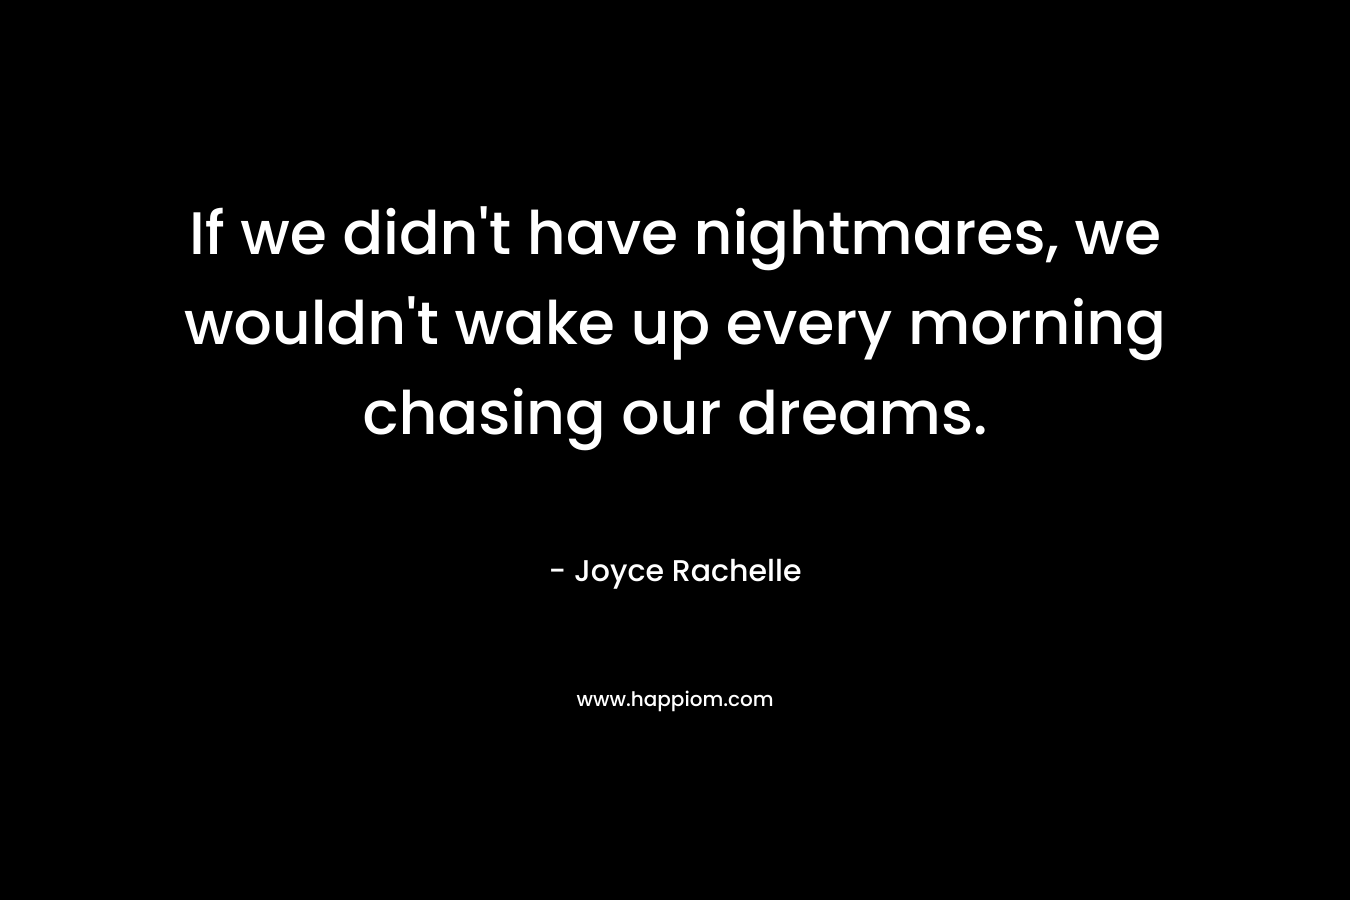 If we didn't have nightmares, we wouldn't wake up every morning chasing our dreams.